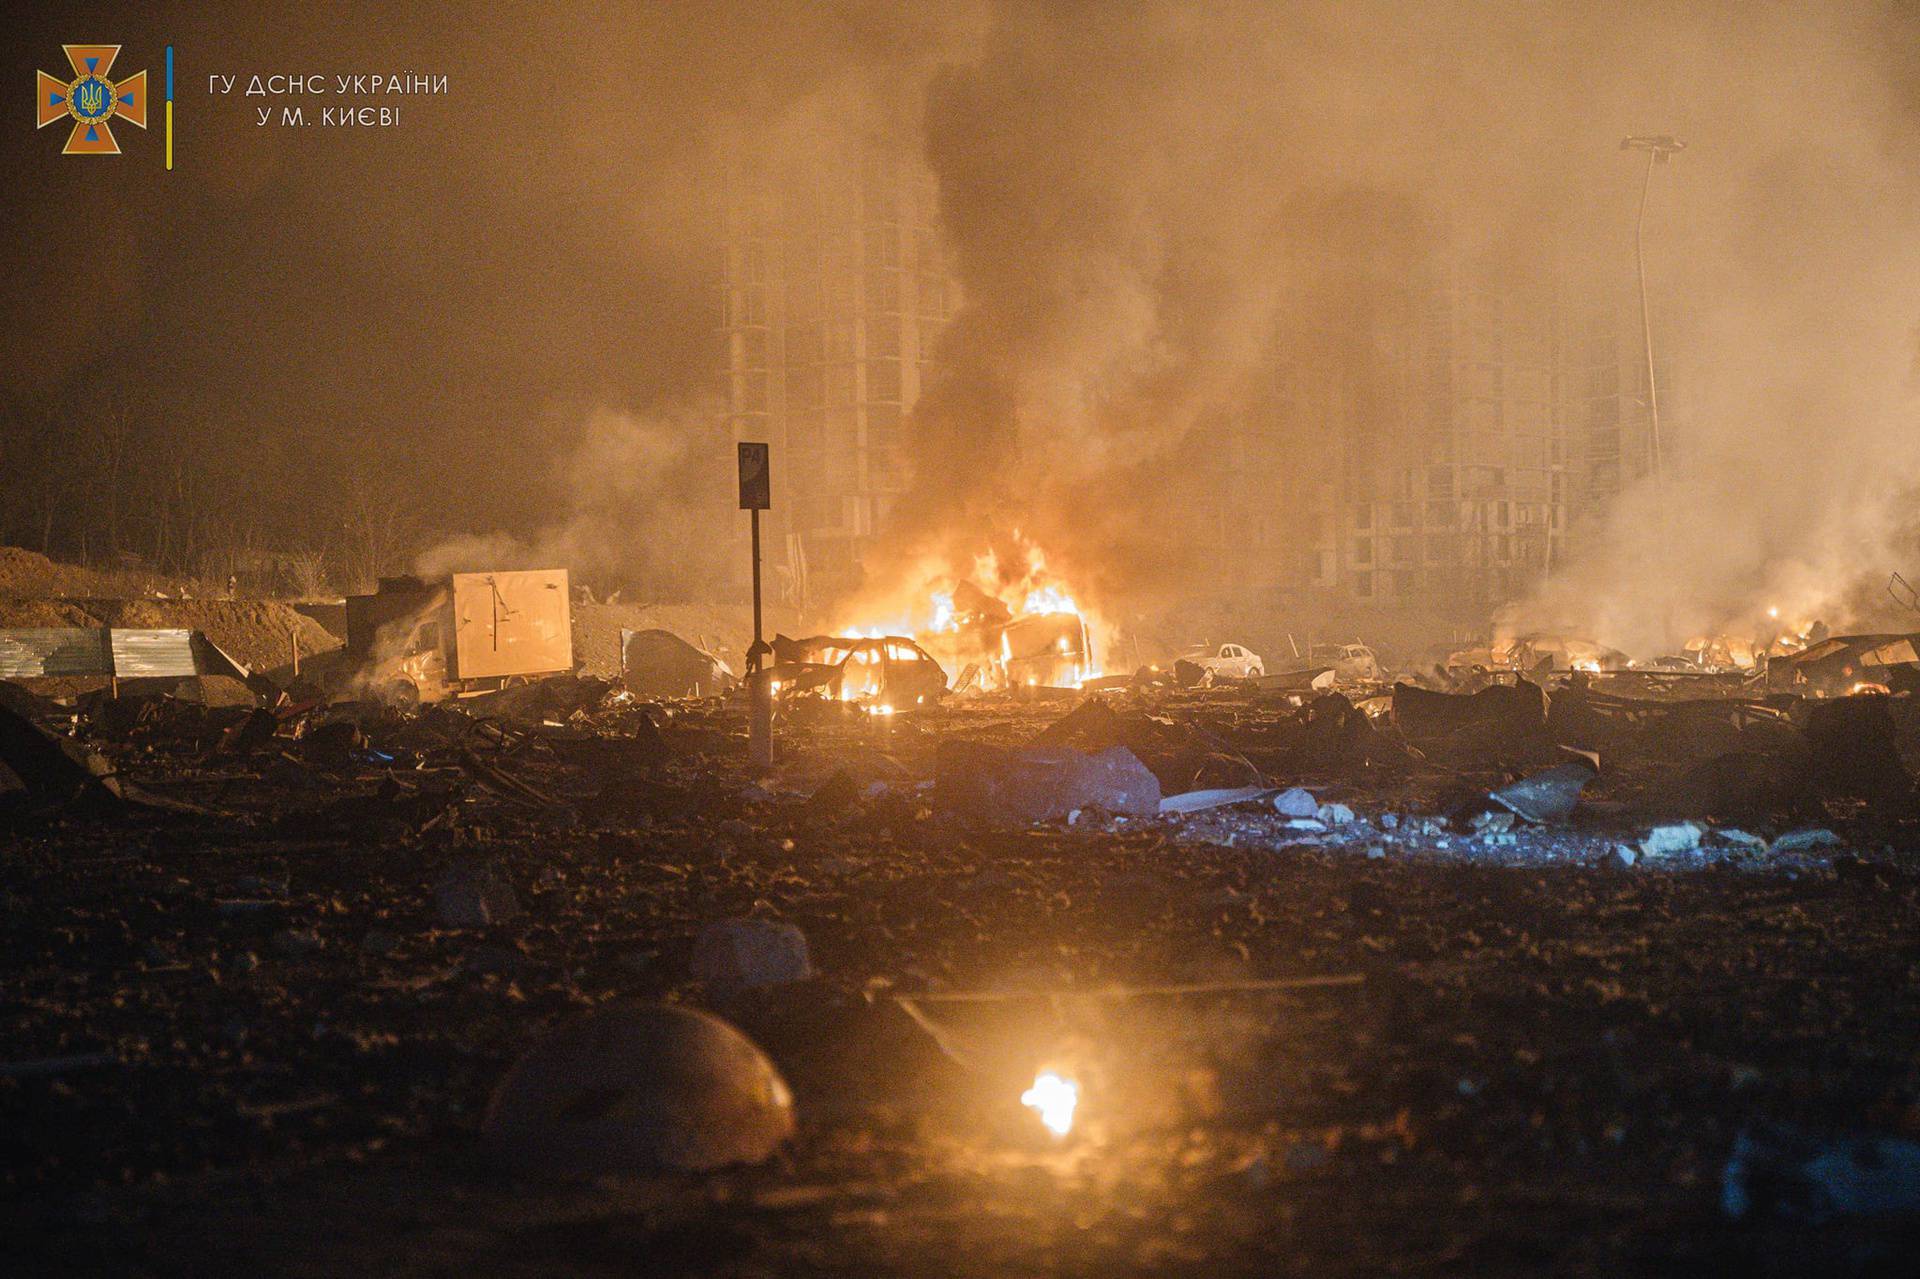 Damaged buildings and burned cars are seen after an airstrike in Kyiv